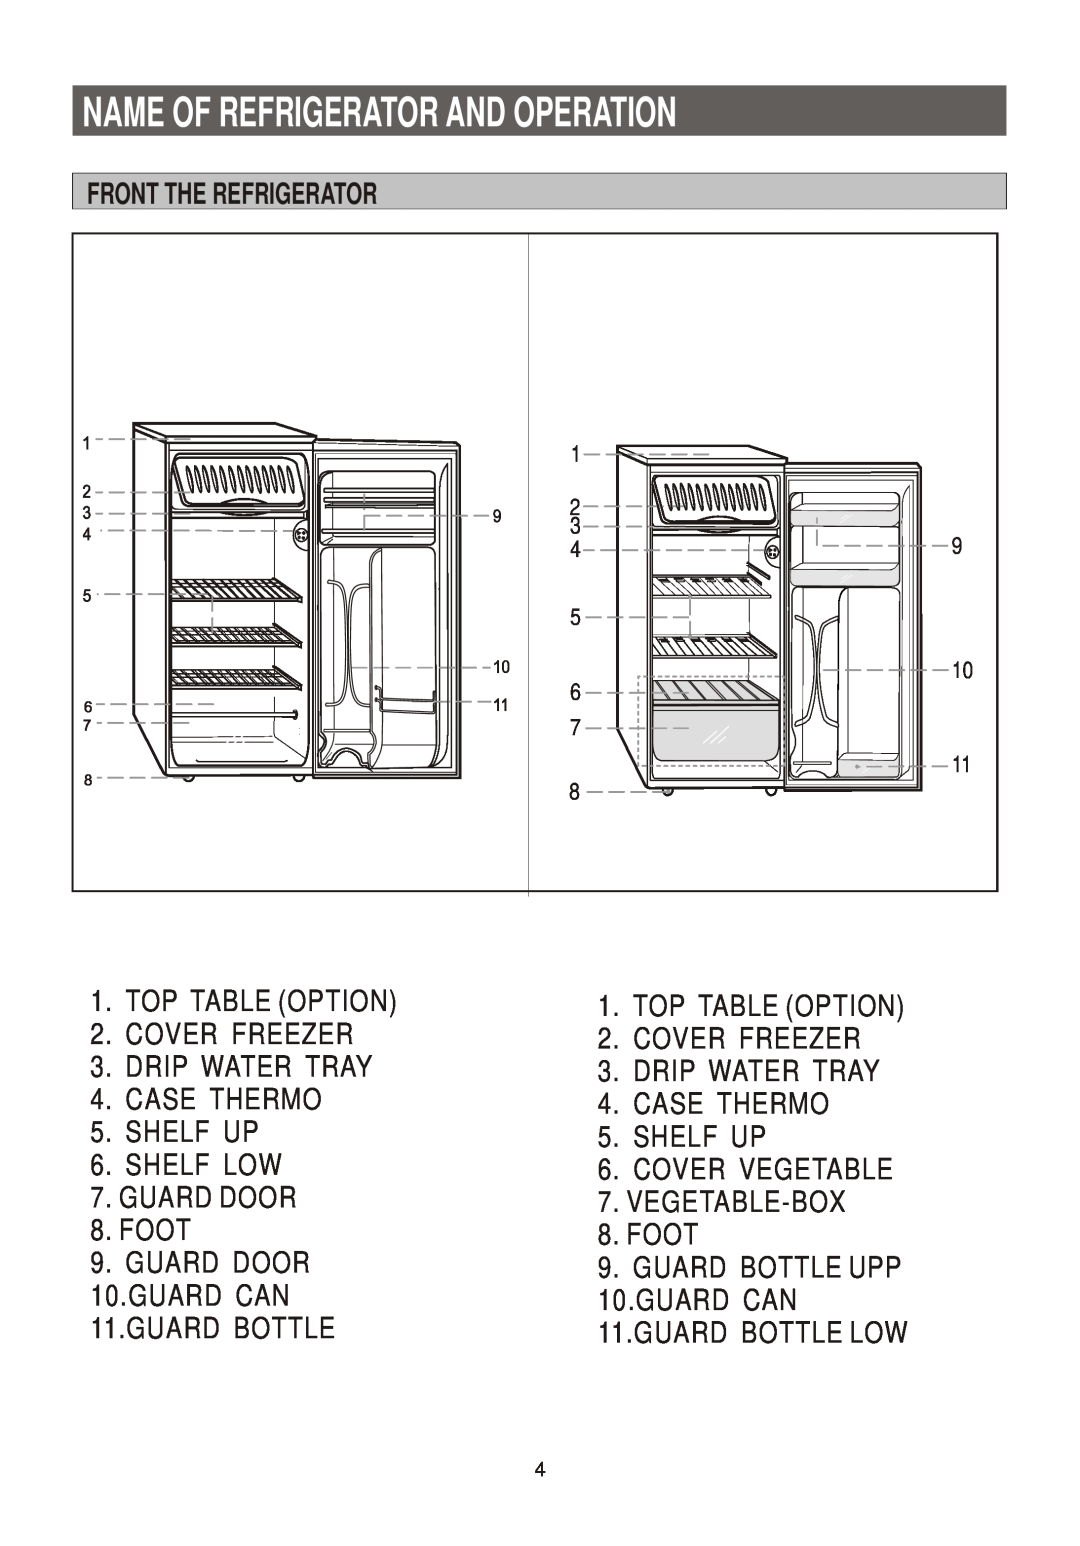 Samsung SRG-149PT, SRG-150, SRG-151PT manual Name Of Refrigerator And Operation, Front The Refrigerator, Foot 